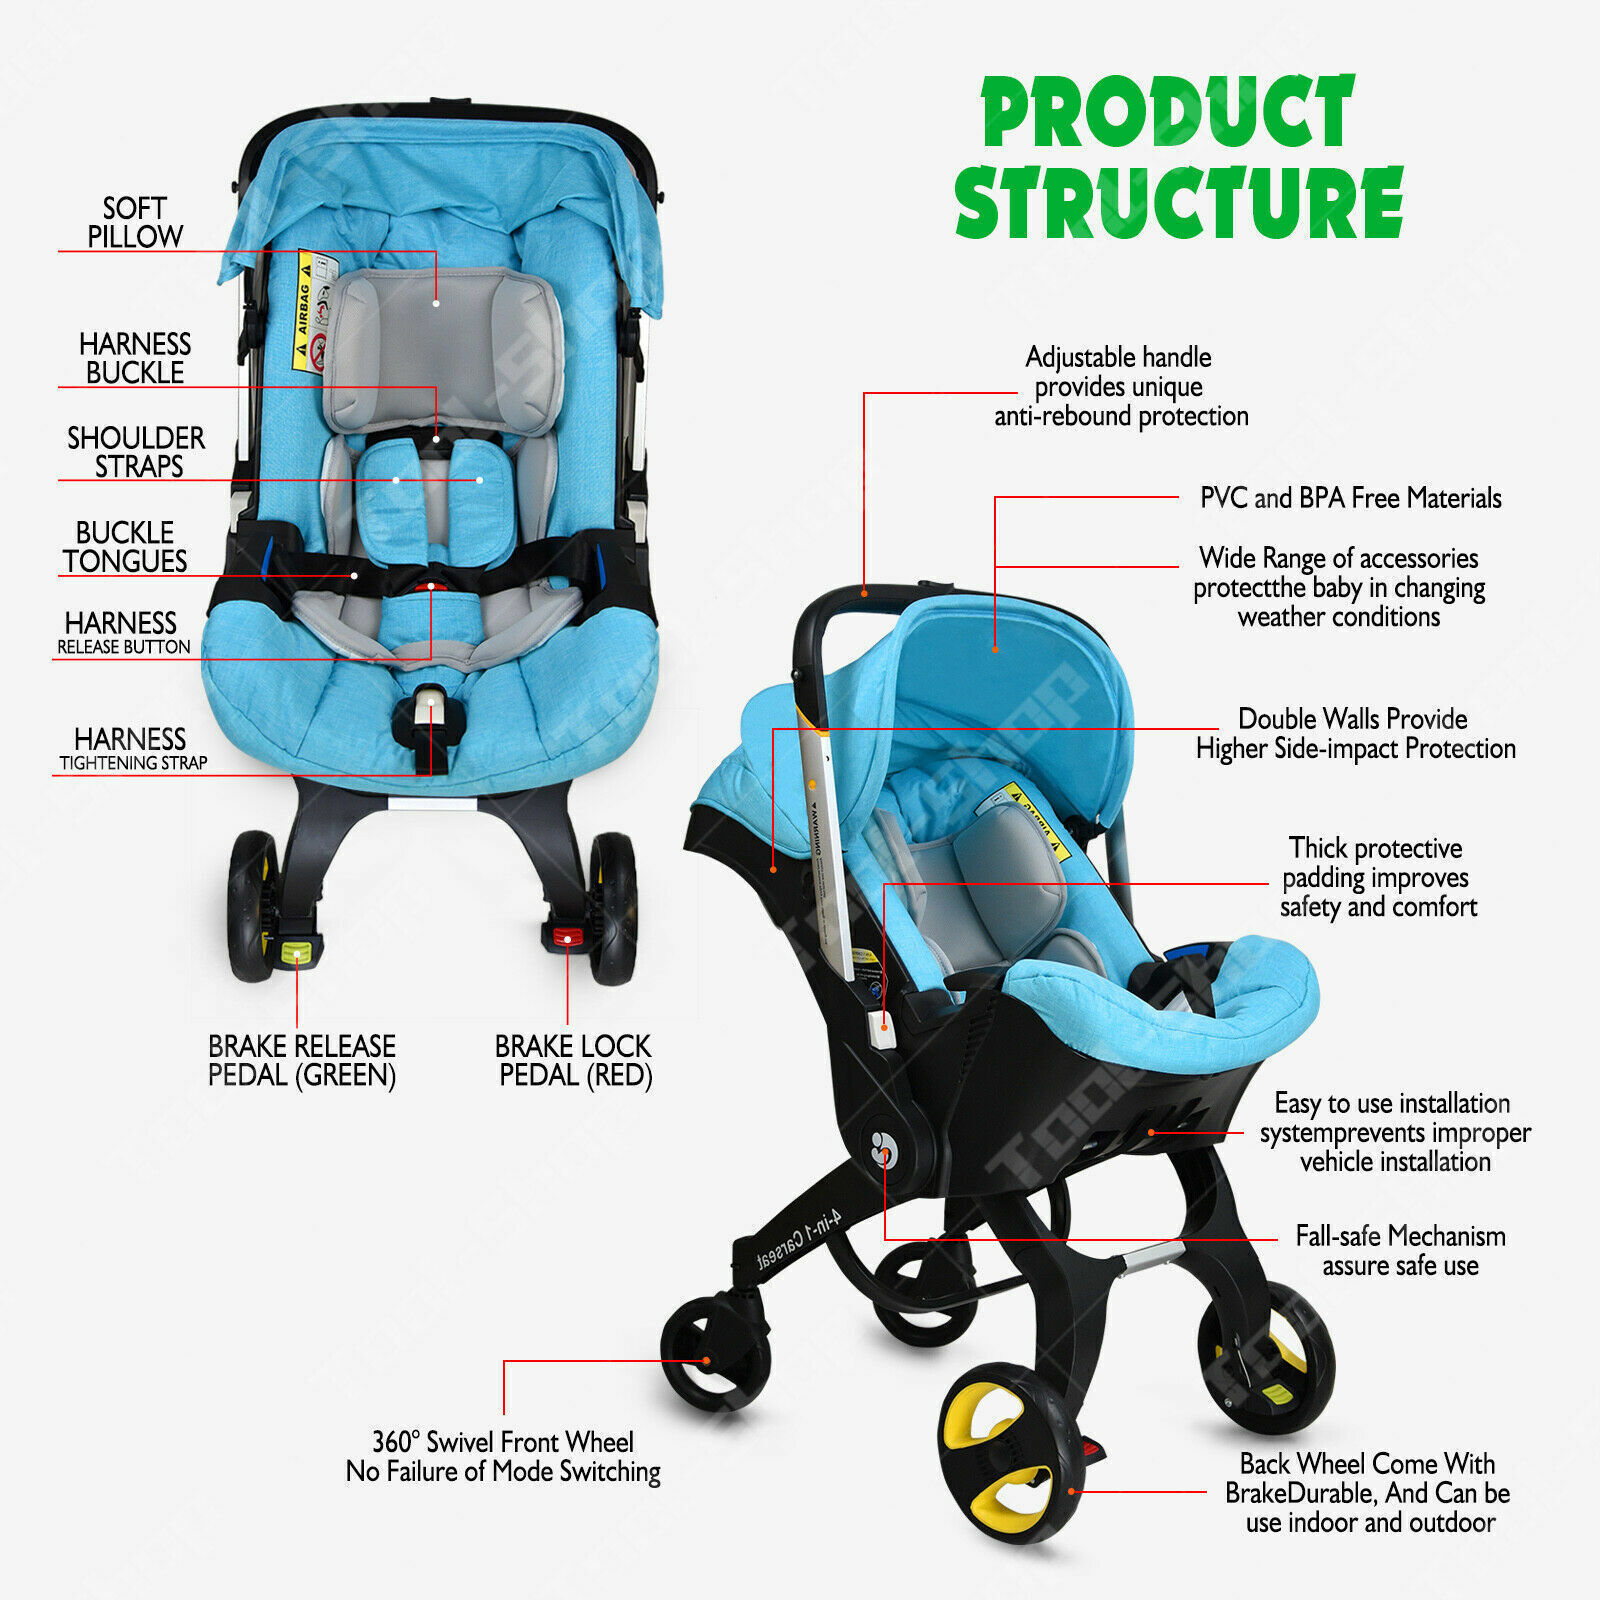 Baby Infant Car Seat Stroller Combos Newborn 4 in 1 Light Travel Foldable USA   